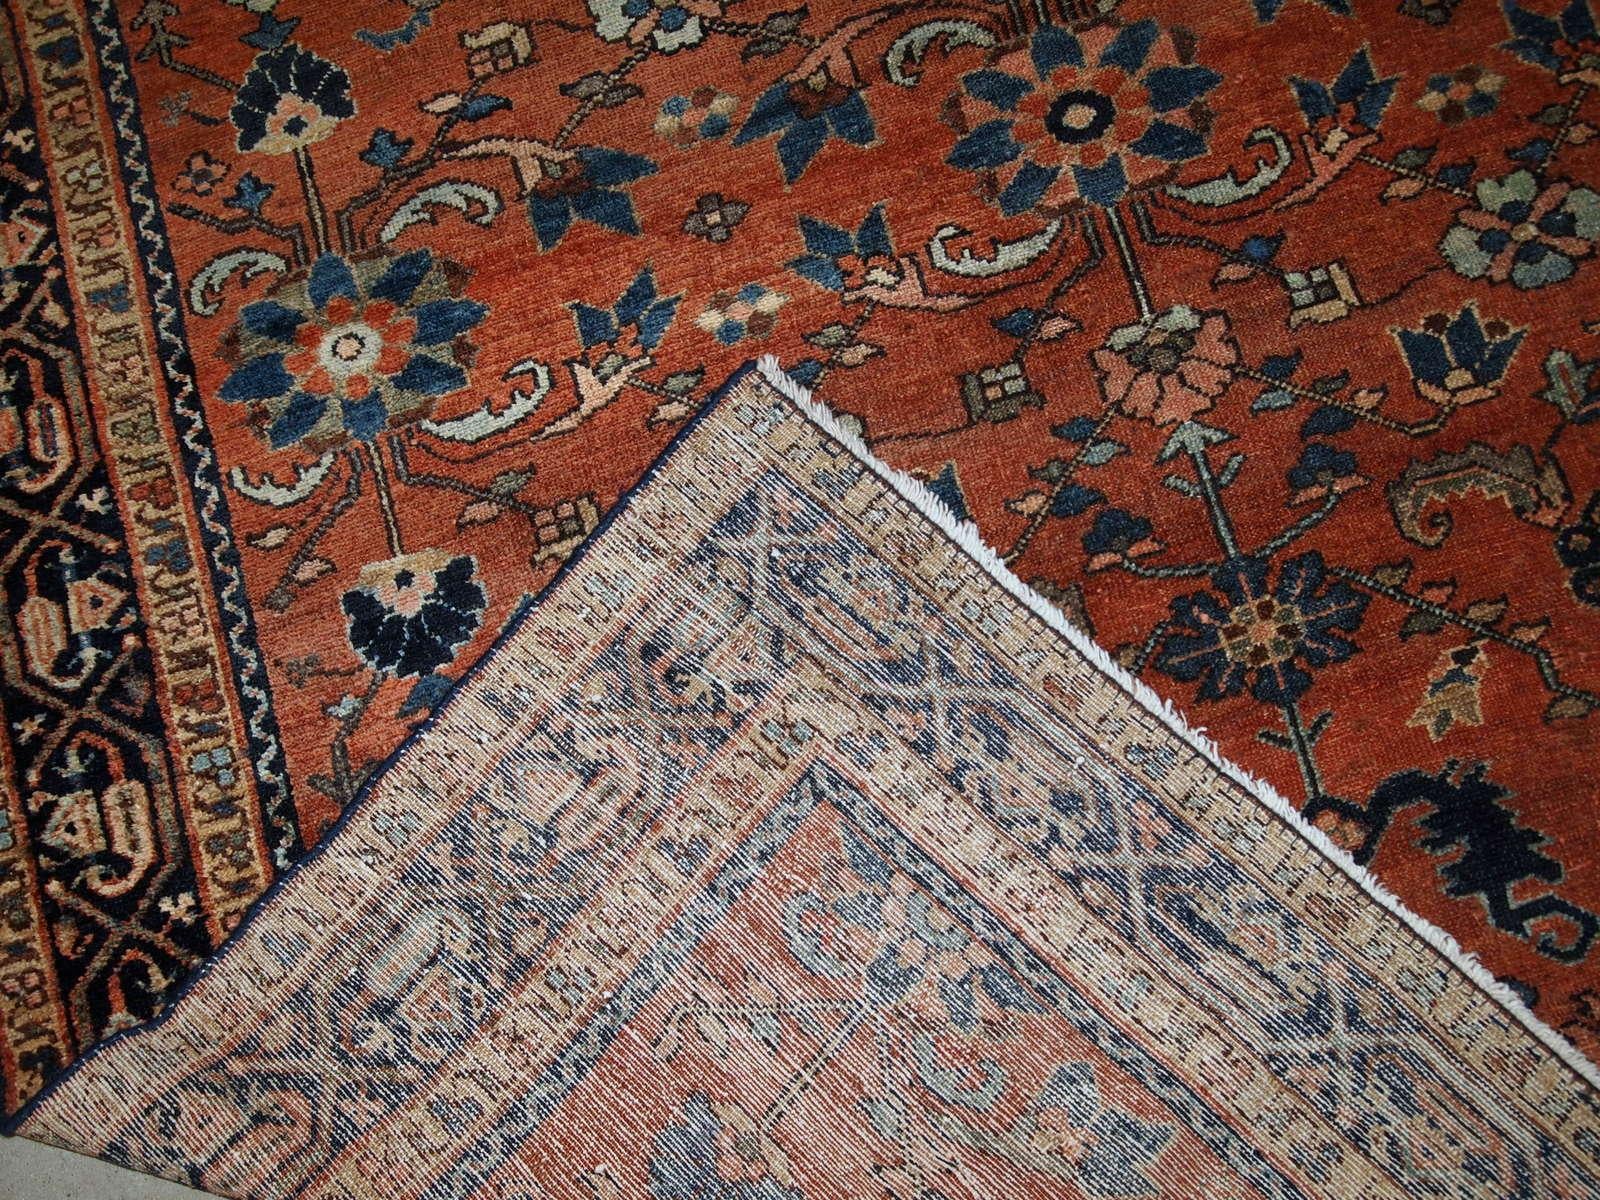 Hand made antique Hamadan rug from the beginning of 20th century. The rug is in red wool and in original good condition.

-condition: original good,

-circa: 1920s,

-size: 4.1' x 6.3' (125cm x 192cm),

-material: wool,

-country of